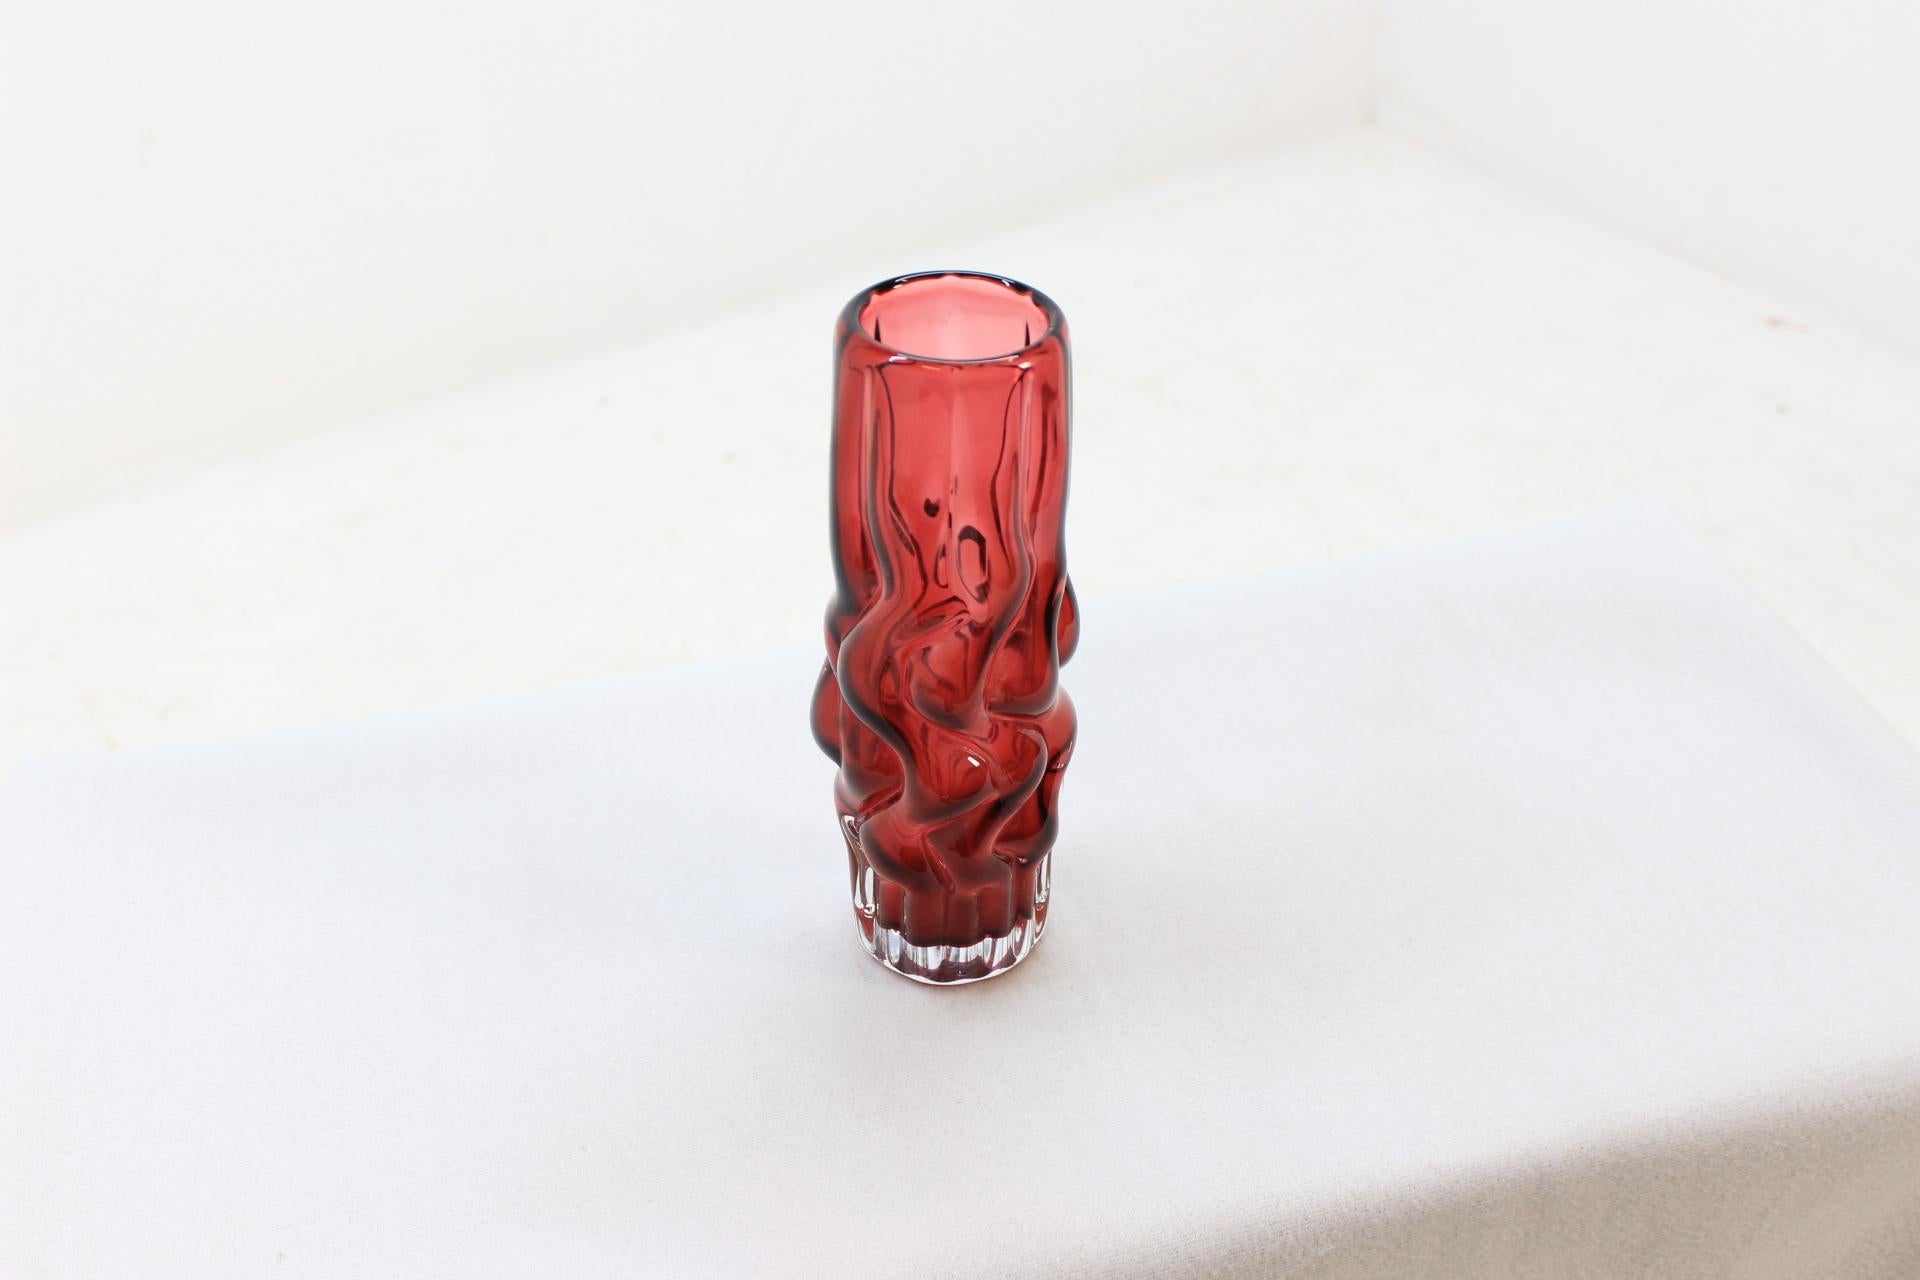 Vase was designed by Pavel Hlava in 1968 for Borse Glass. The item made of ruby compactly shaped glass. Decor is known in collector's slang as 